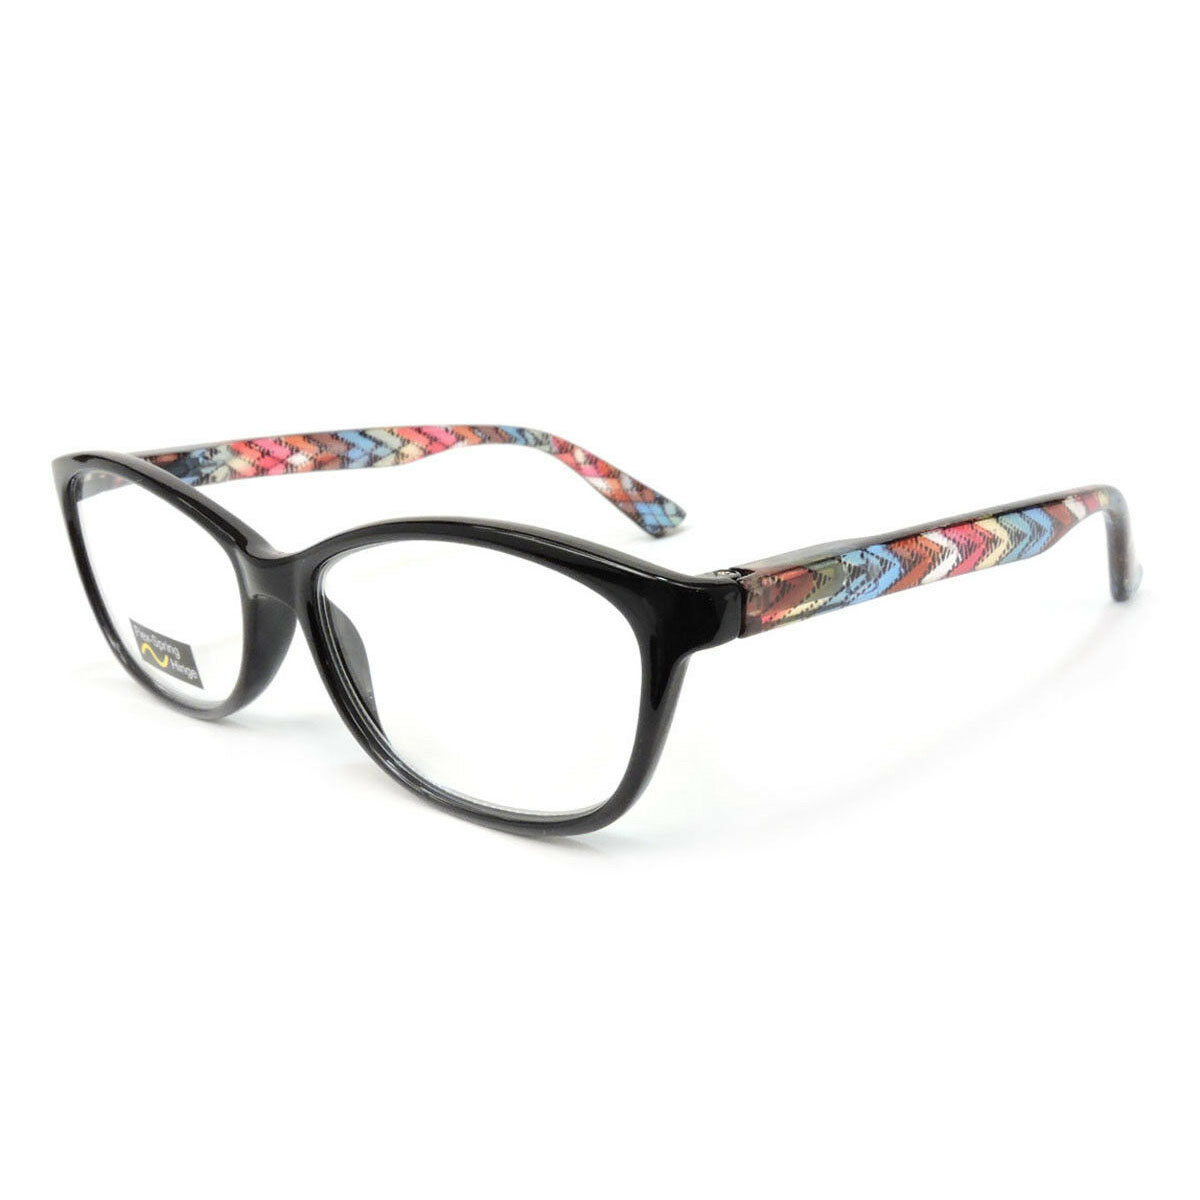 Classic Frame Reading Glasses Colorful Arms Retro Vintage Style - Black, +2.25